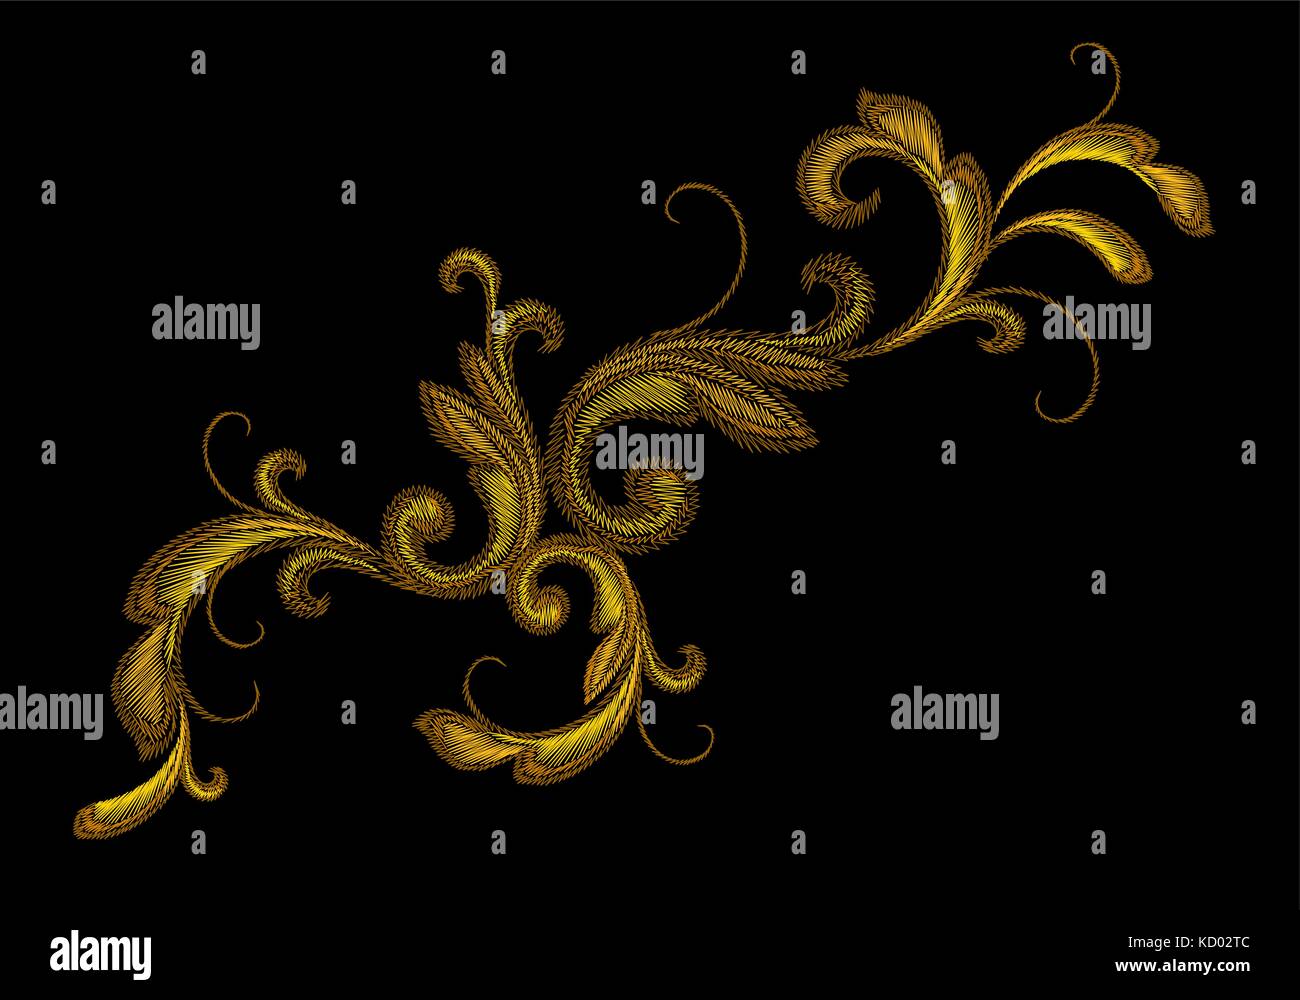 Golden Victorian Embroidery Floral Ornament. Stitch texture fashion print patch gold flower Baroque design element vector illustration art Stock Vector